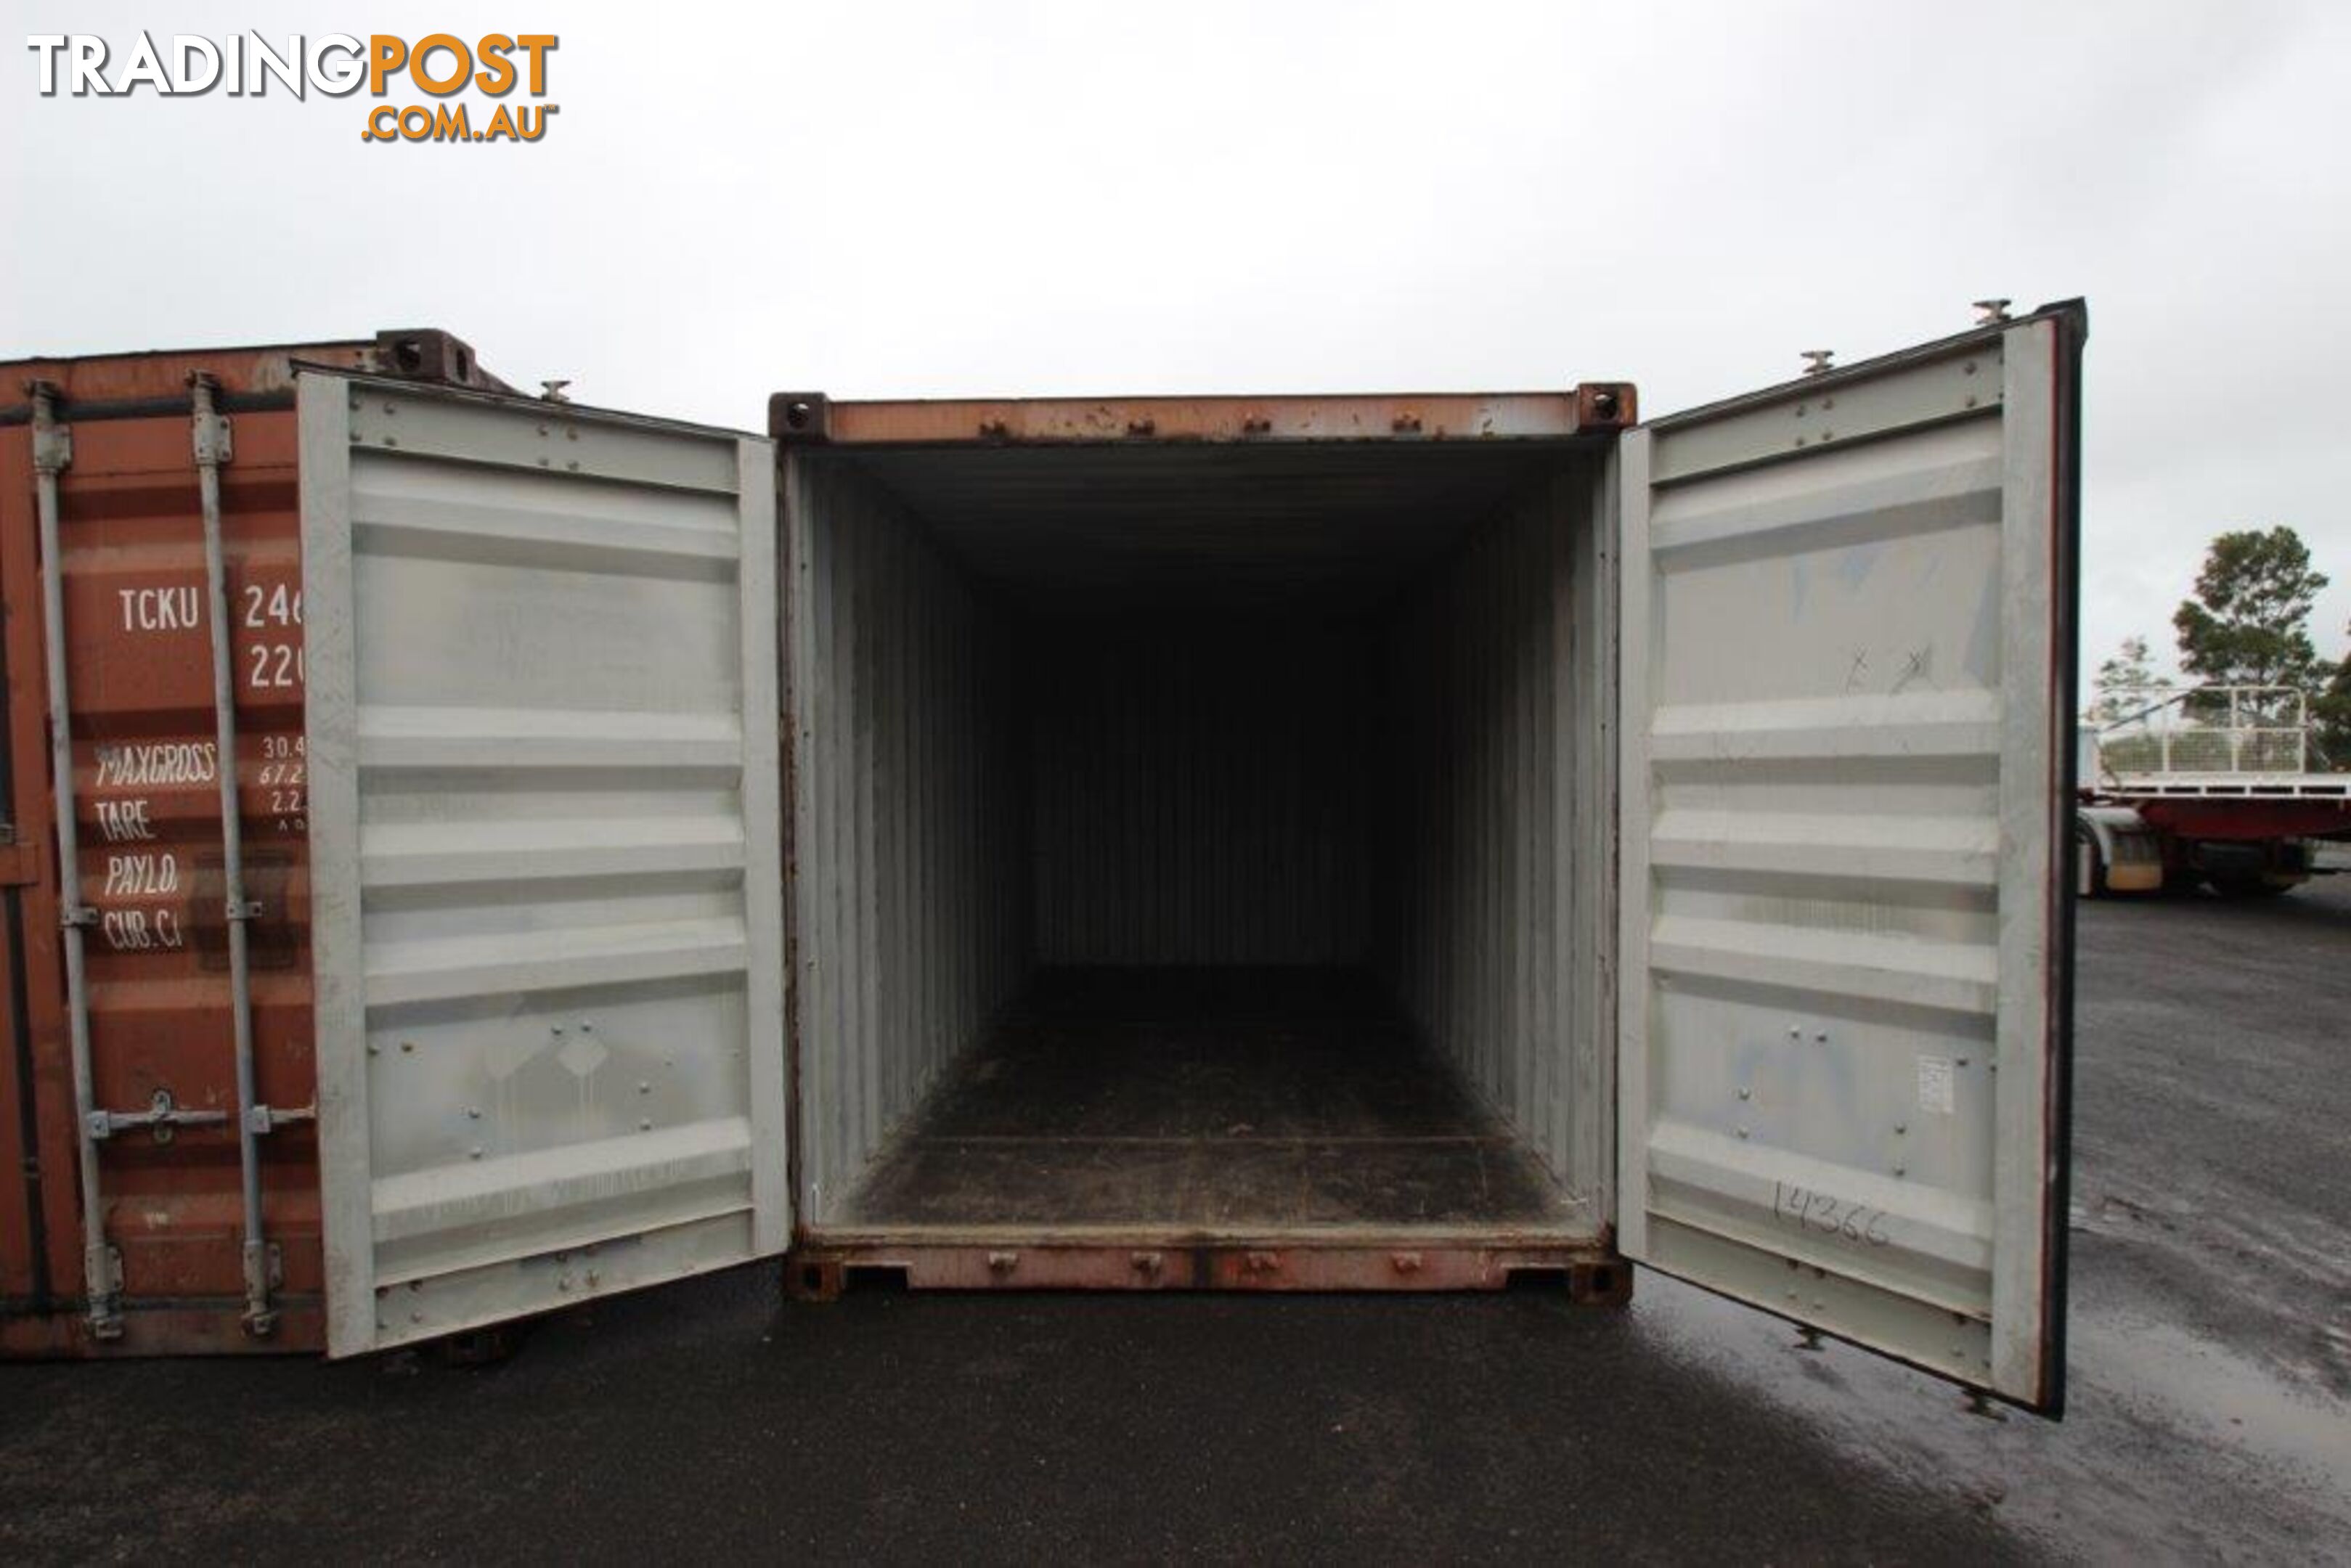 Used 20ft Shipping Containers Gungahlin - From $3650 + GST